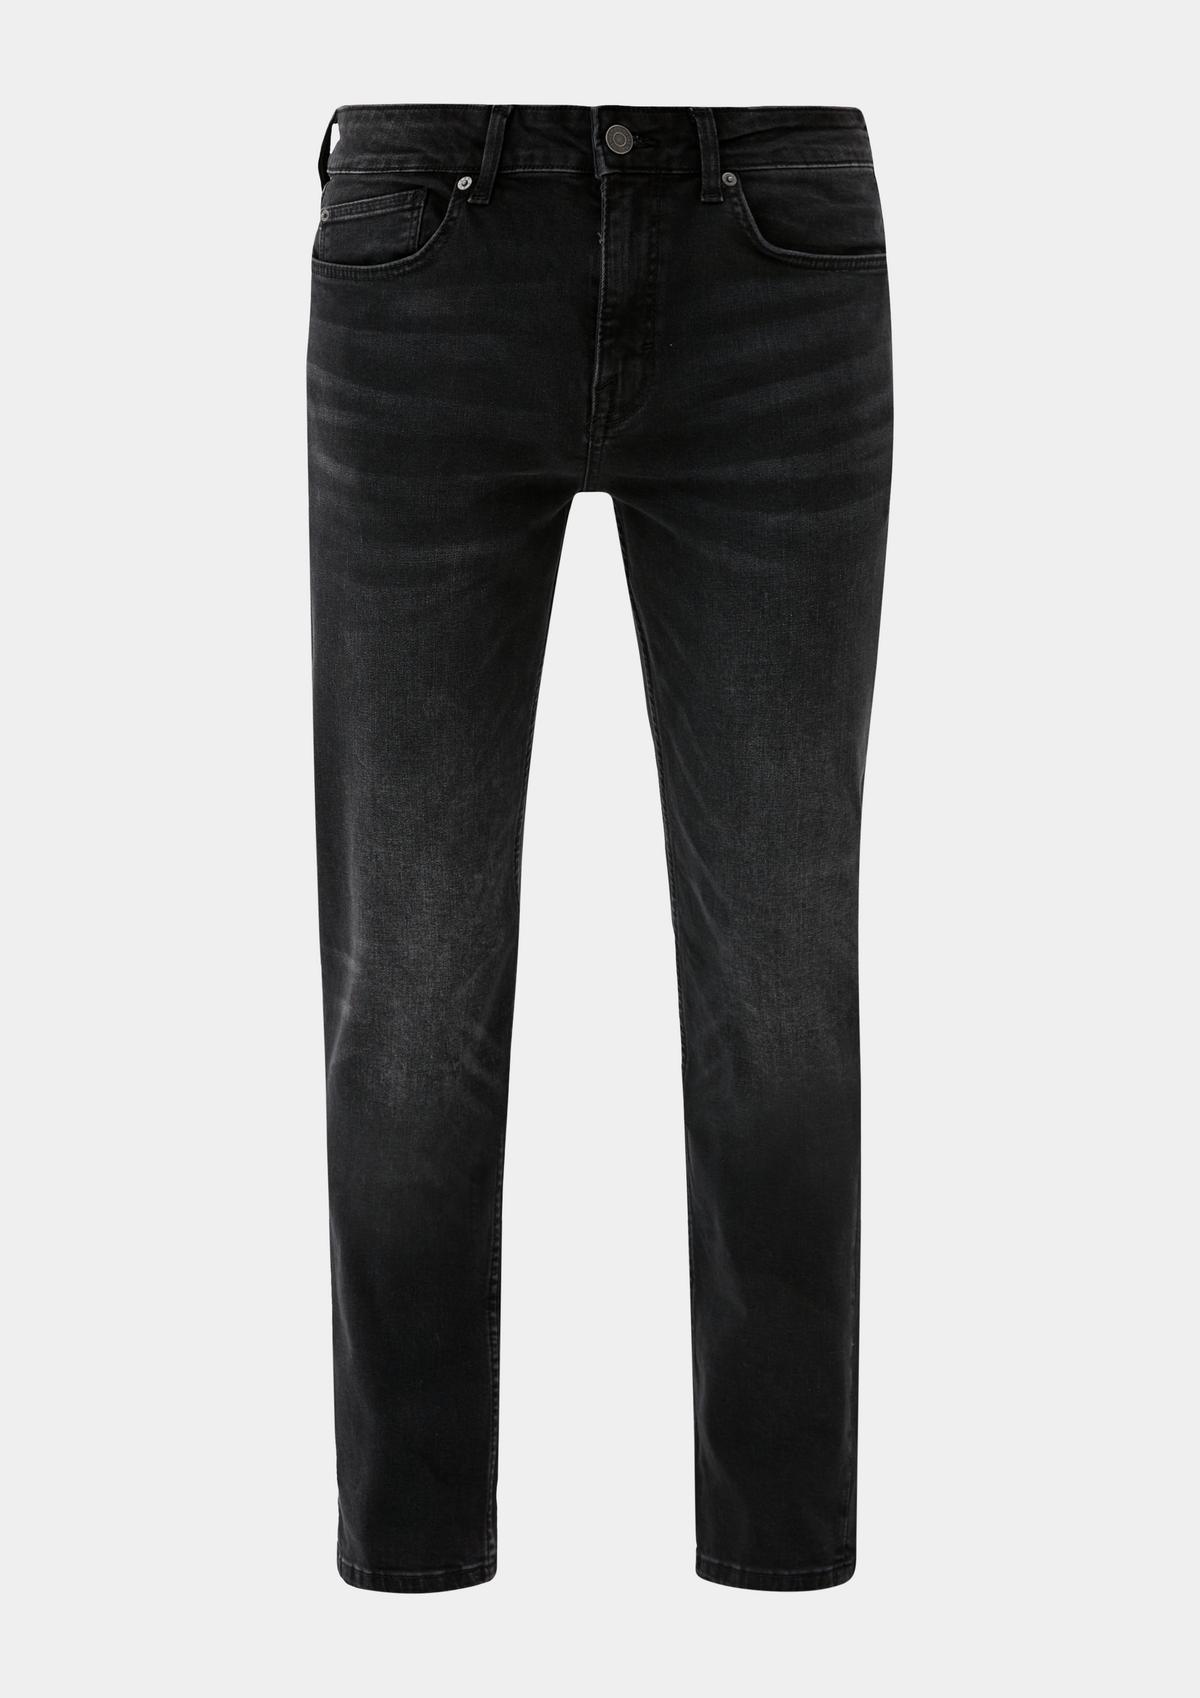 s.Oliver Jeans / Slim Fit / Mid Rise / Straight Leg